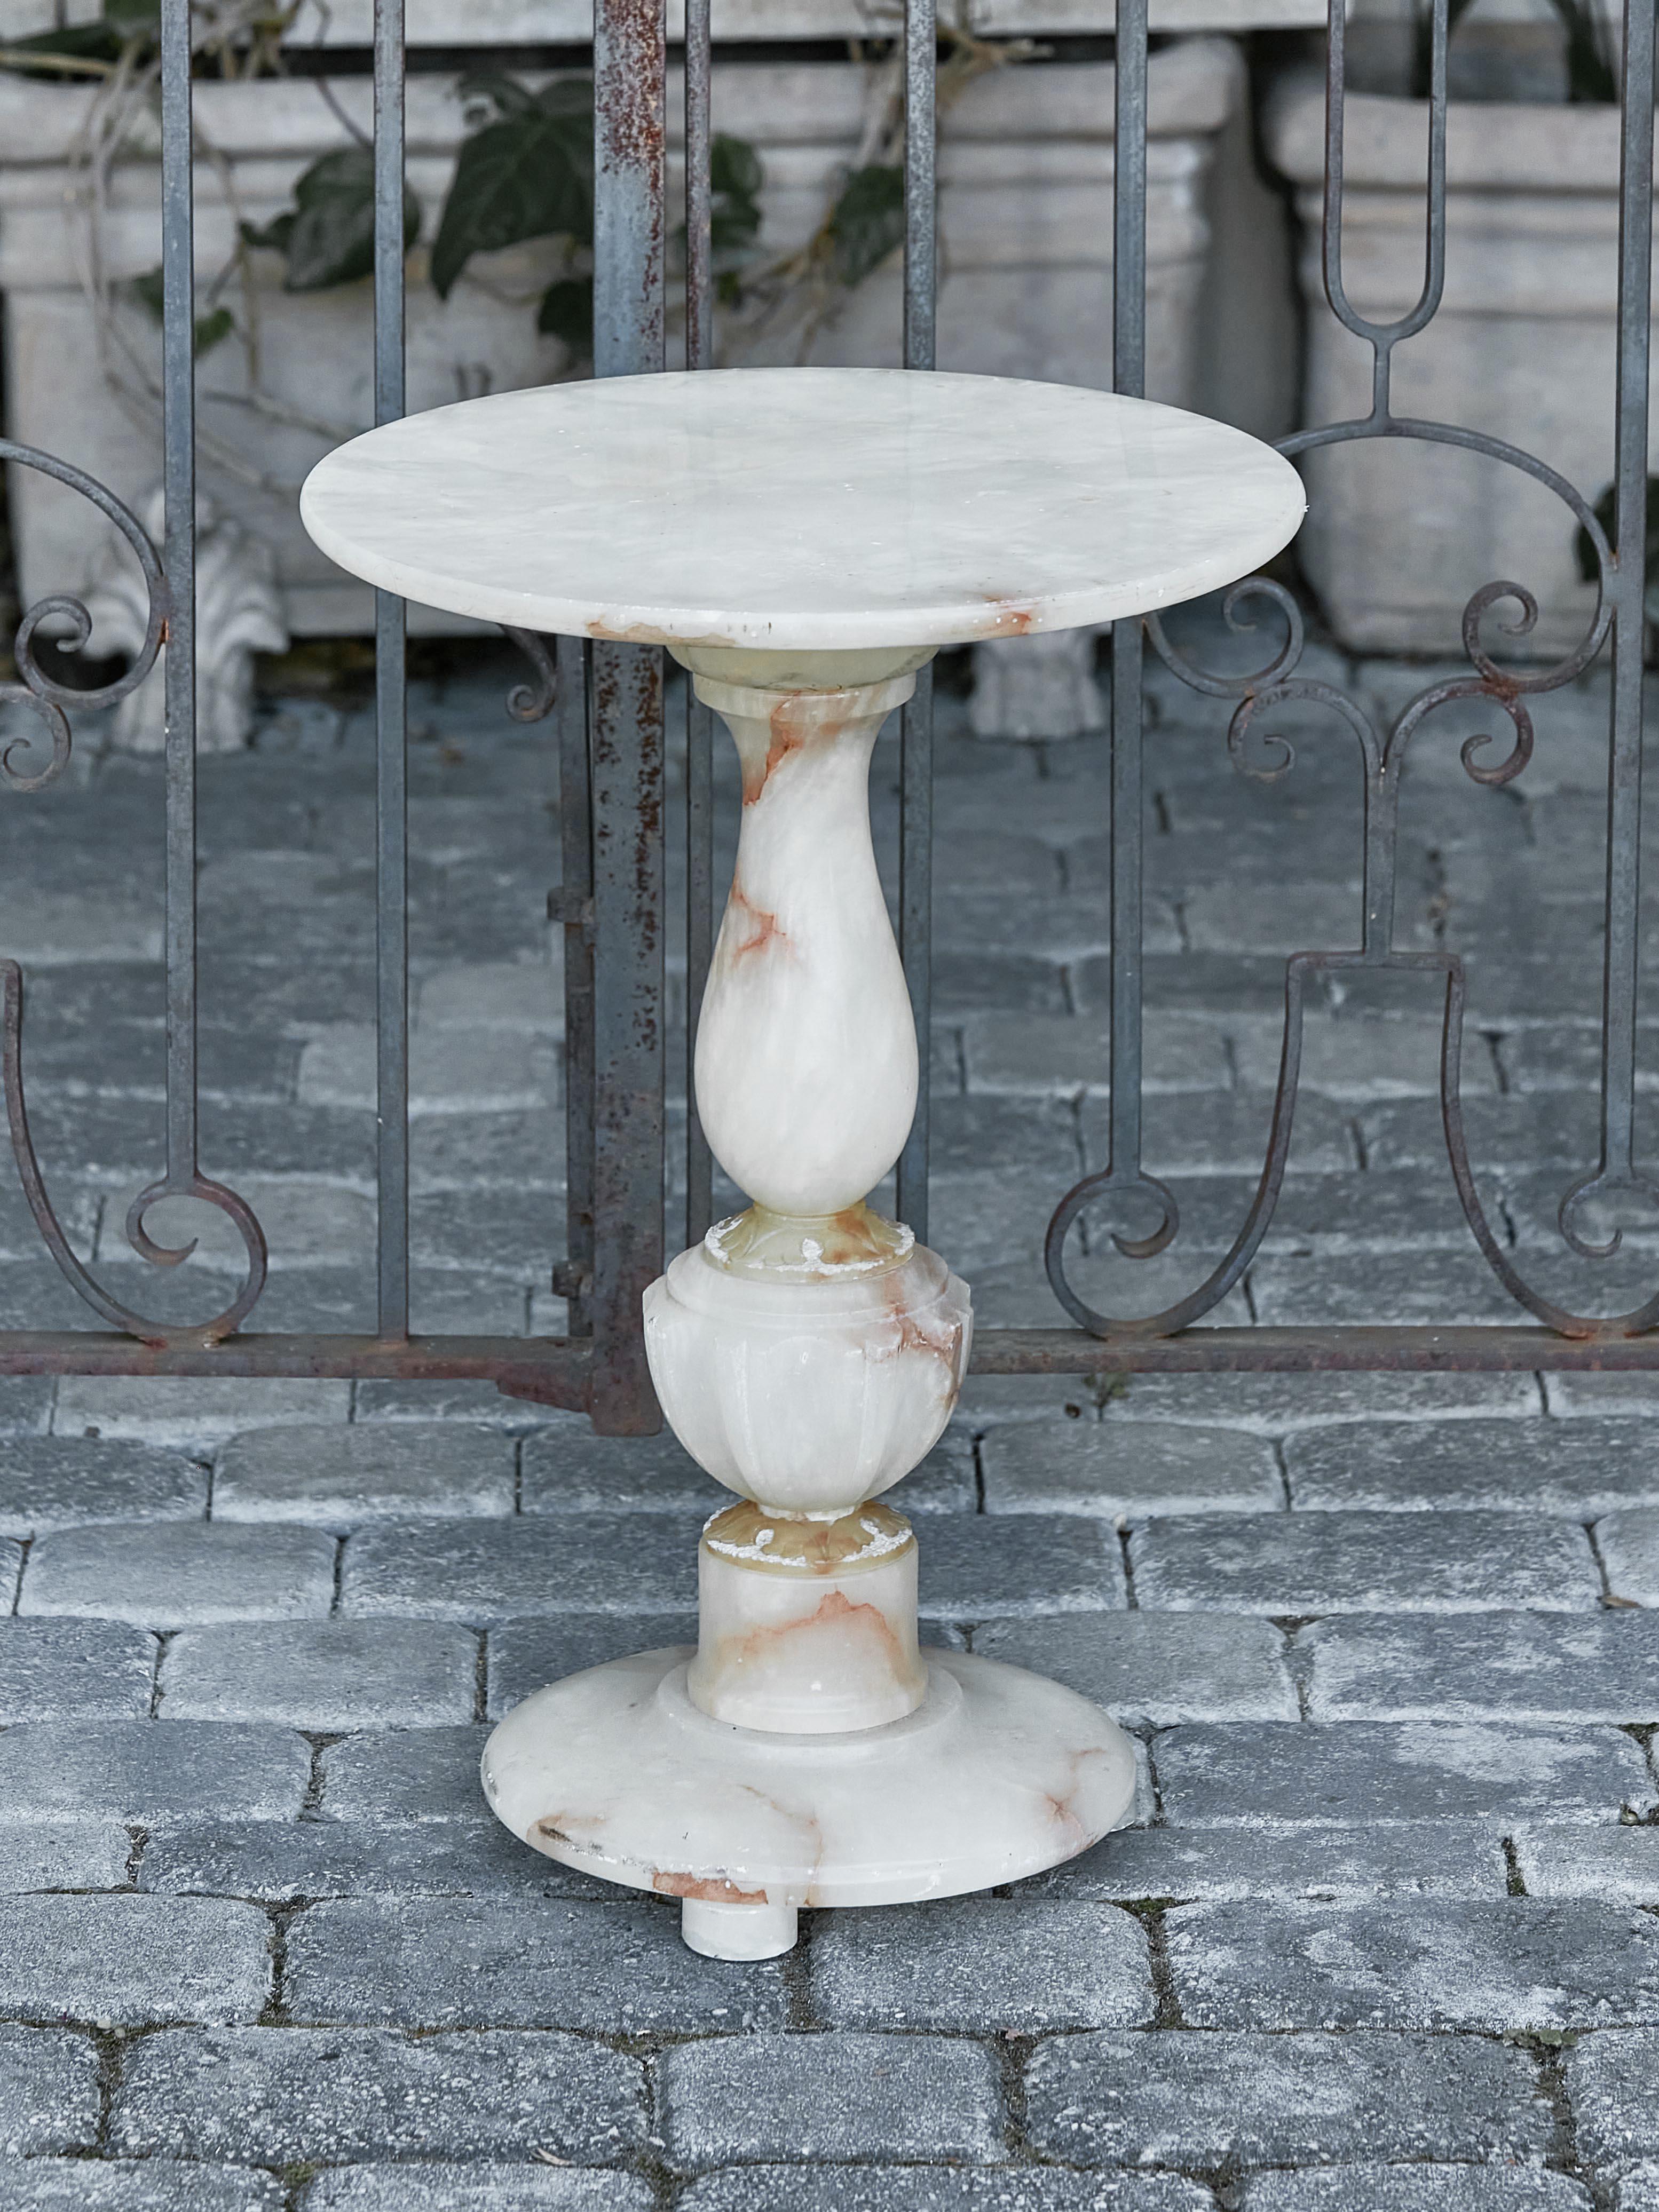 A French alabaster guéridon side table from circa 1920-1930 with circular top, pedestal base and petite feet. This French alabaster guéridon side table, dating from the 1920s to 1930s, exudes an air of timeless elegance and delicate beauty. Its